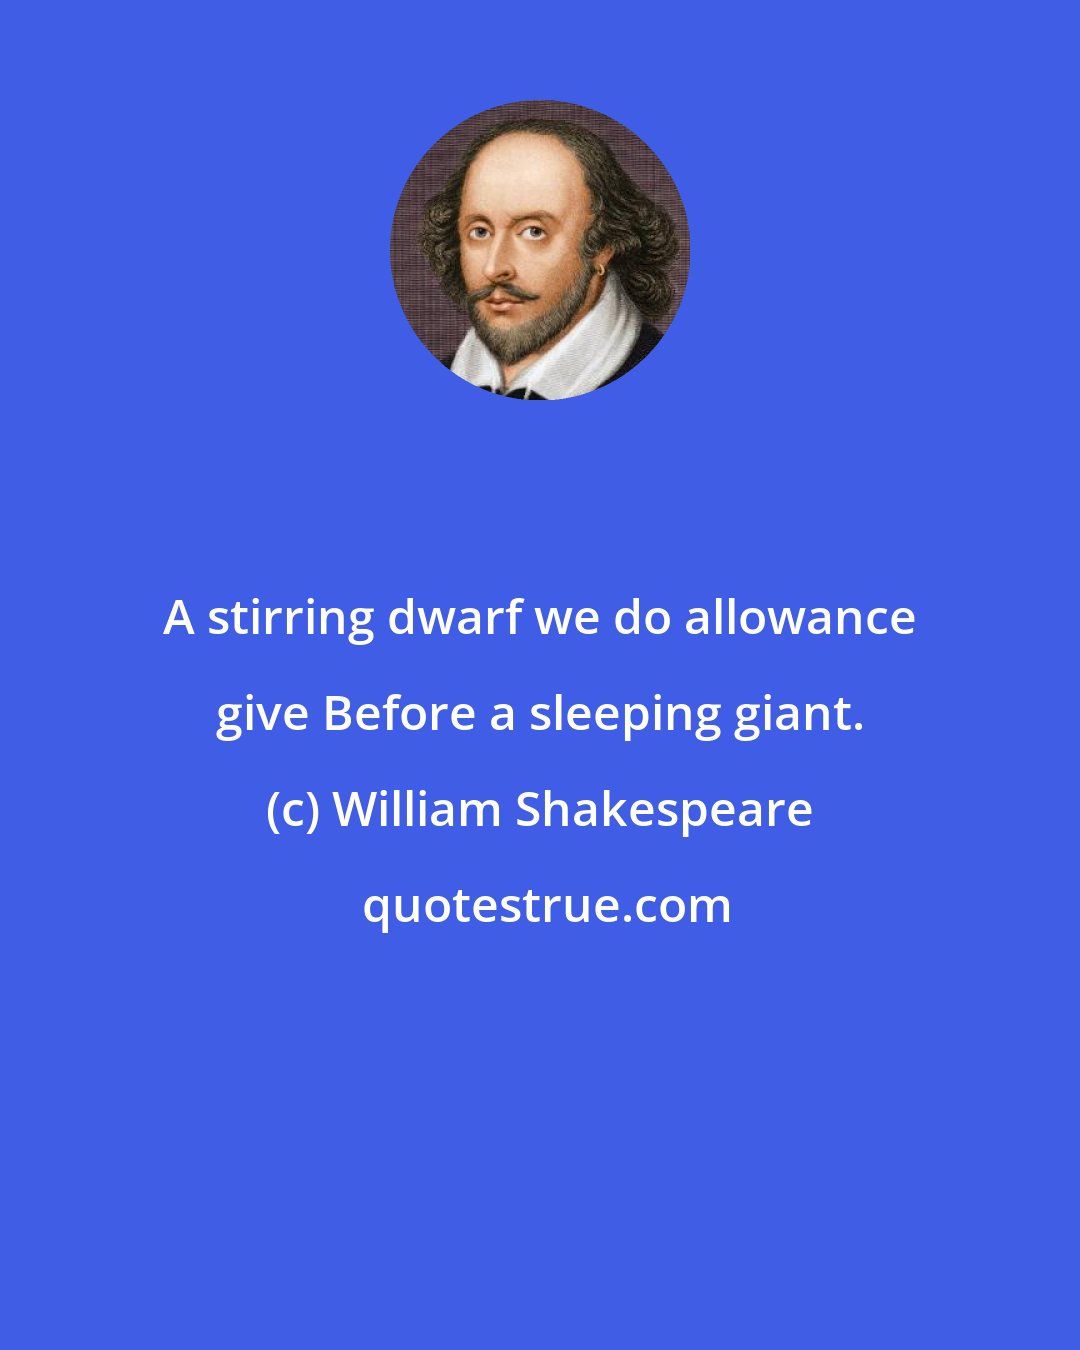 William Shakespeare: A stirring dwarf we do allowance give Before a sleeping giant.